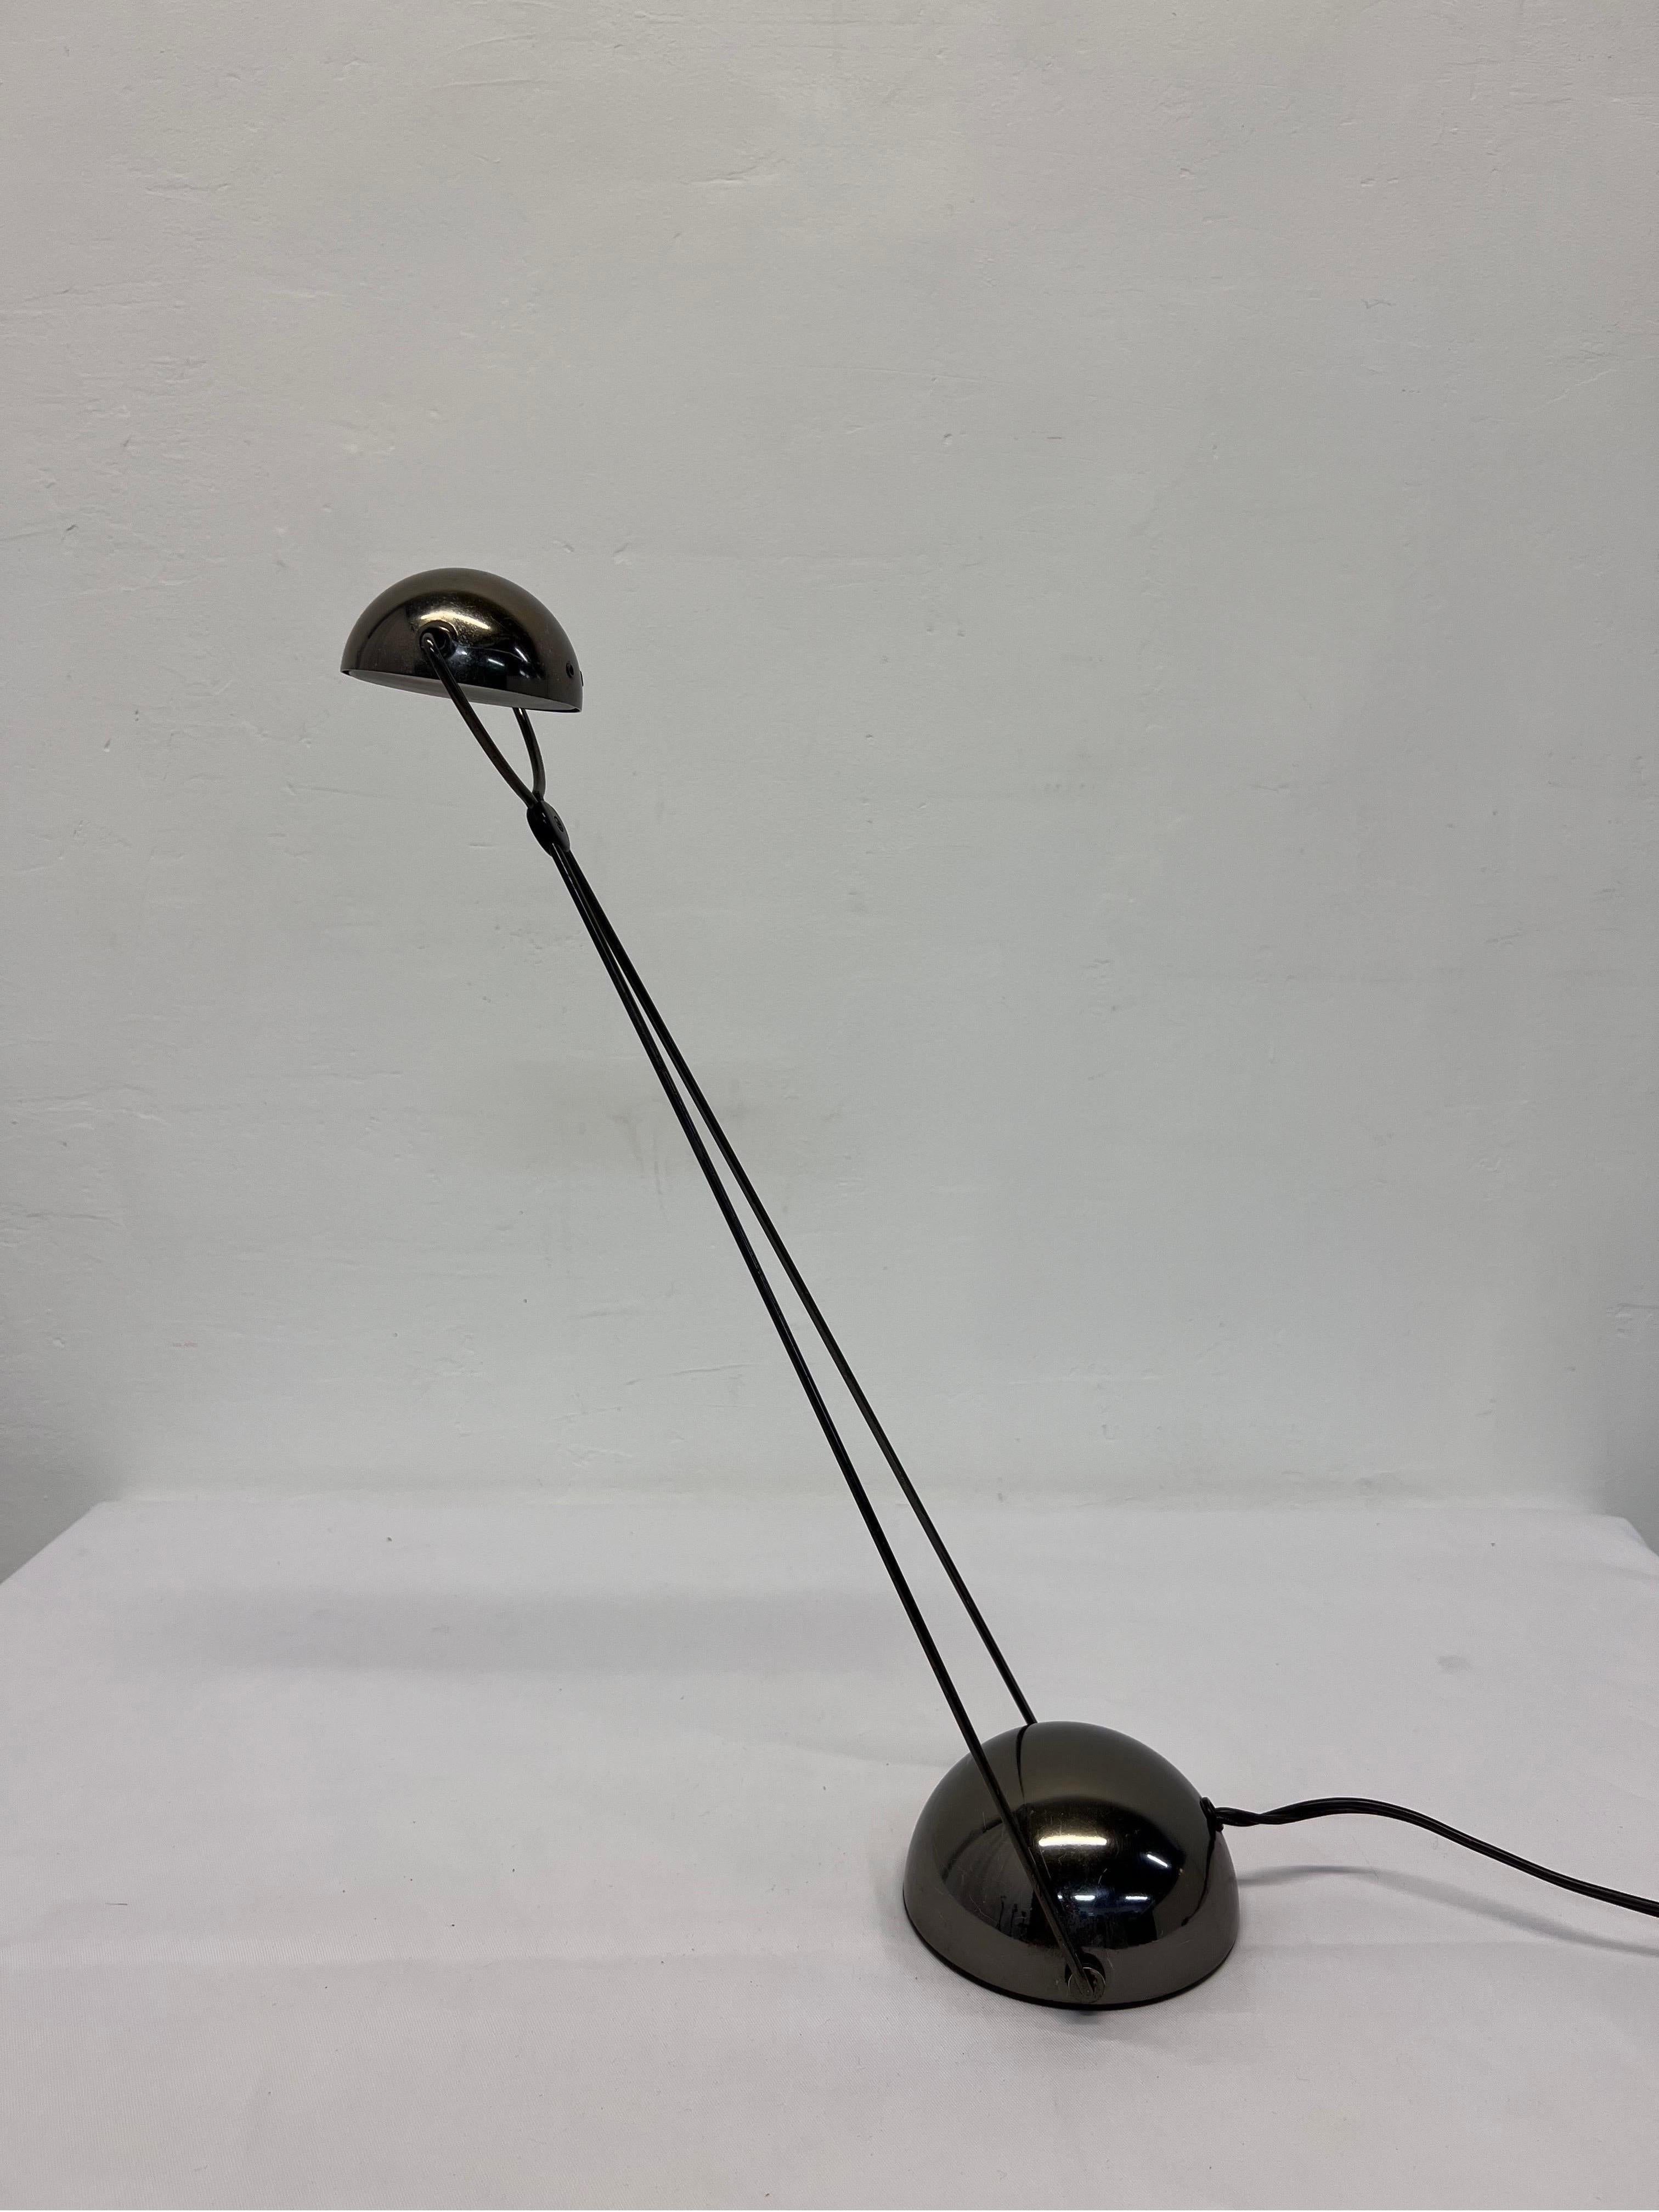 Postmodern table desk or task lamp, articulating and adjustable design rendered in gunmetal gray metal and plastic, designed by Paolo Piva for Stefao Cevoli, Italy, 1980s.